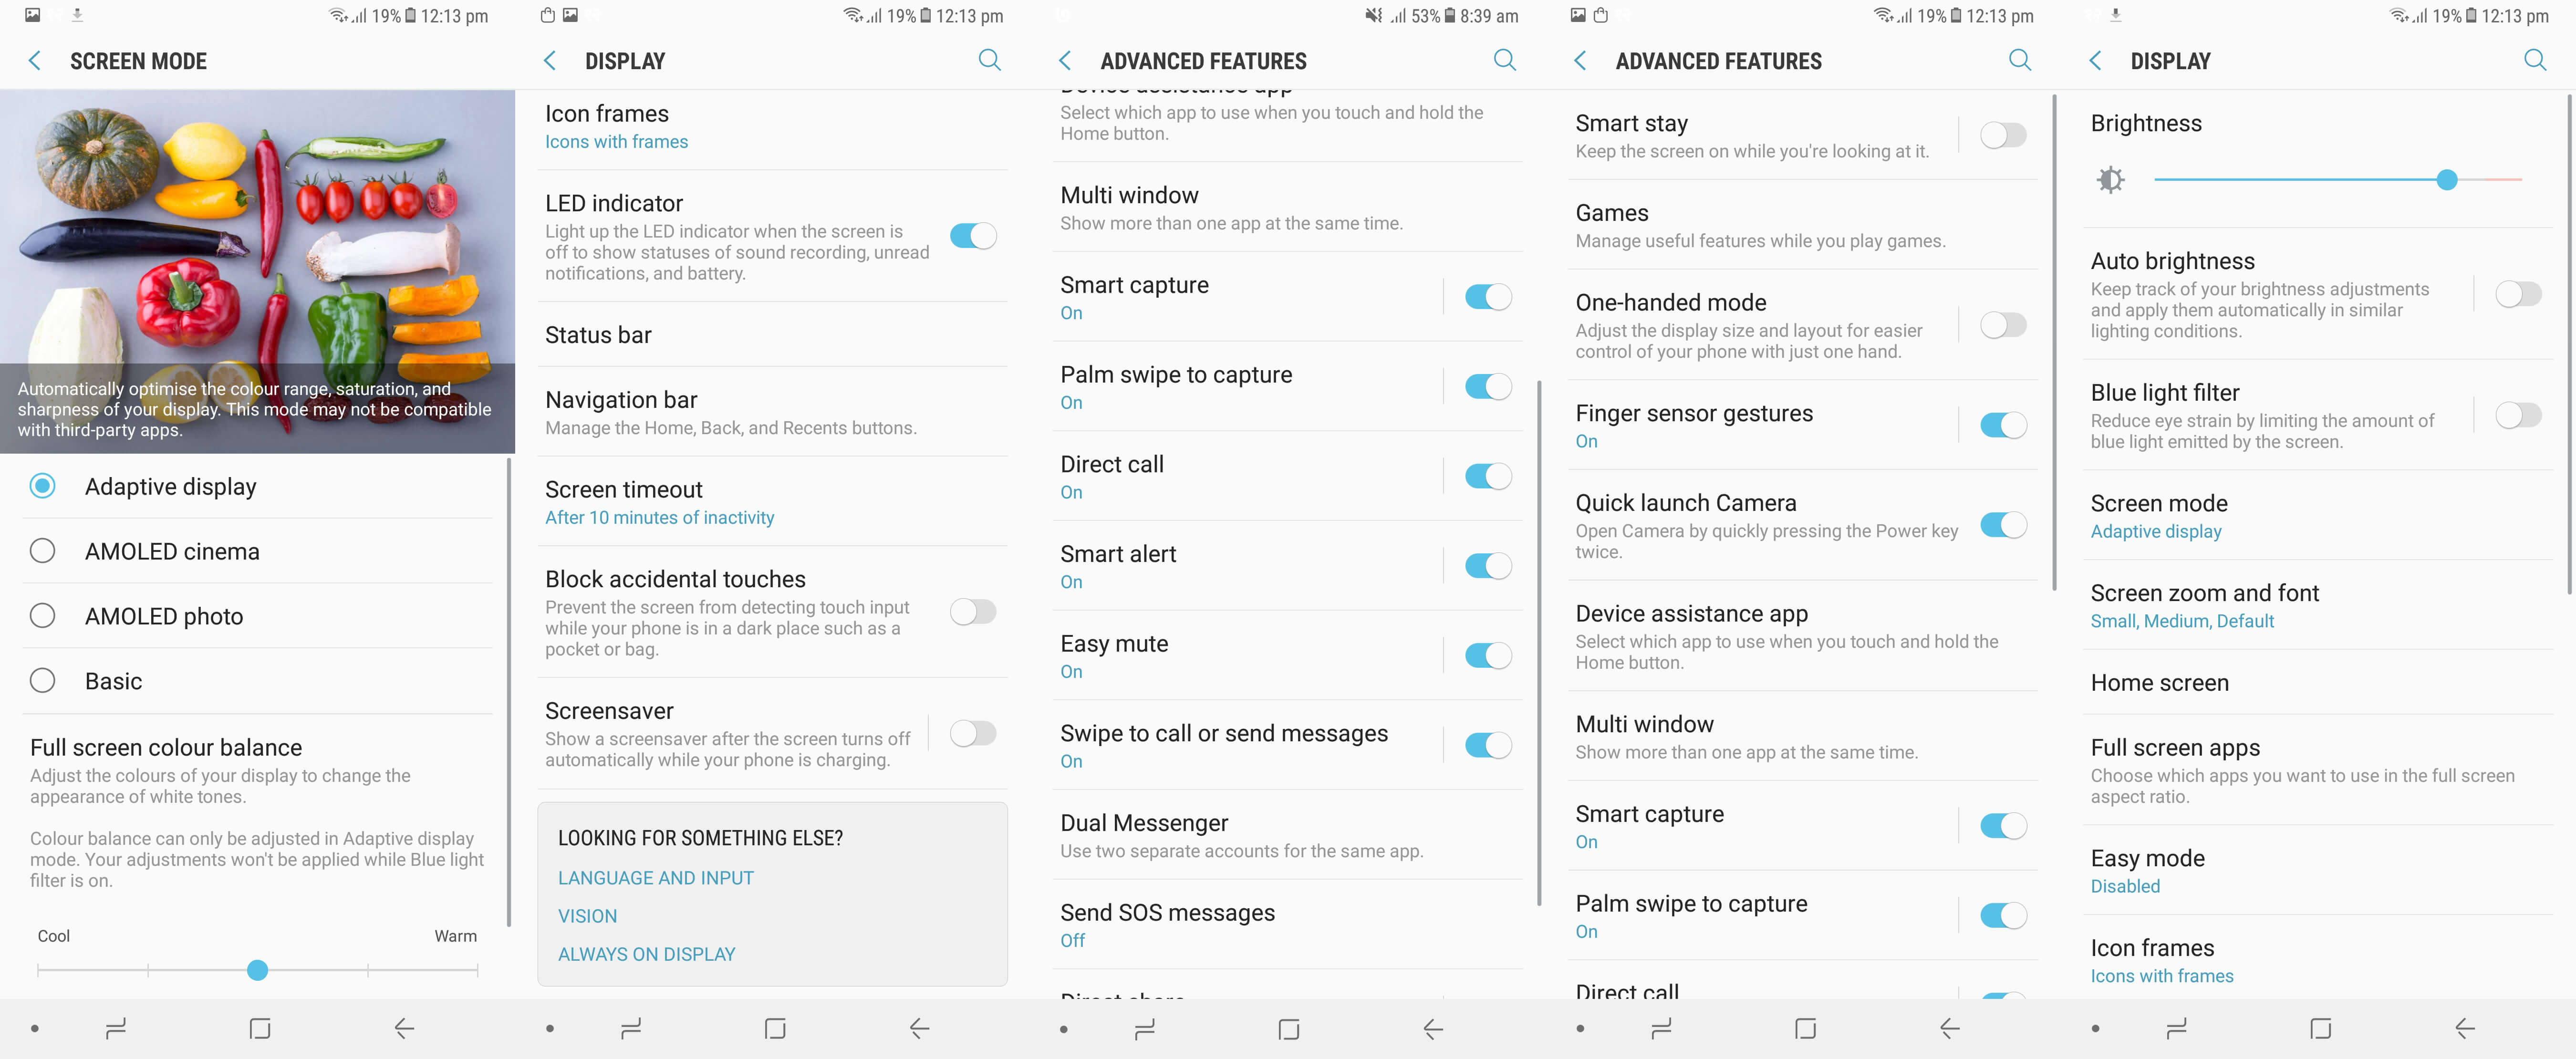 Samsung-Galaxy-A8+-2018-Features-UI-Android-Version-Display-Mode-Settings